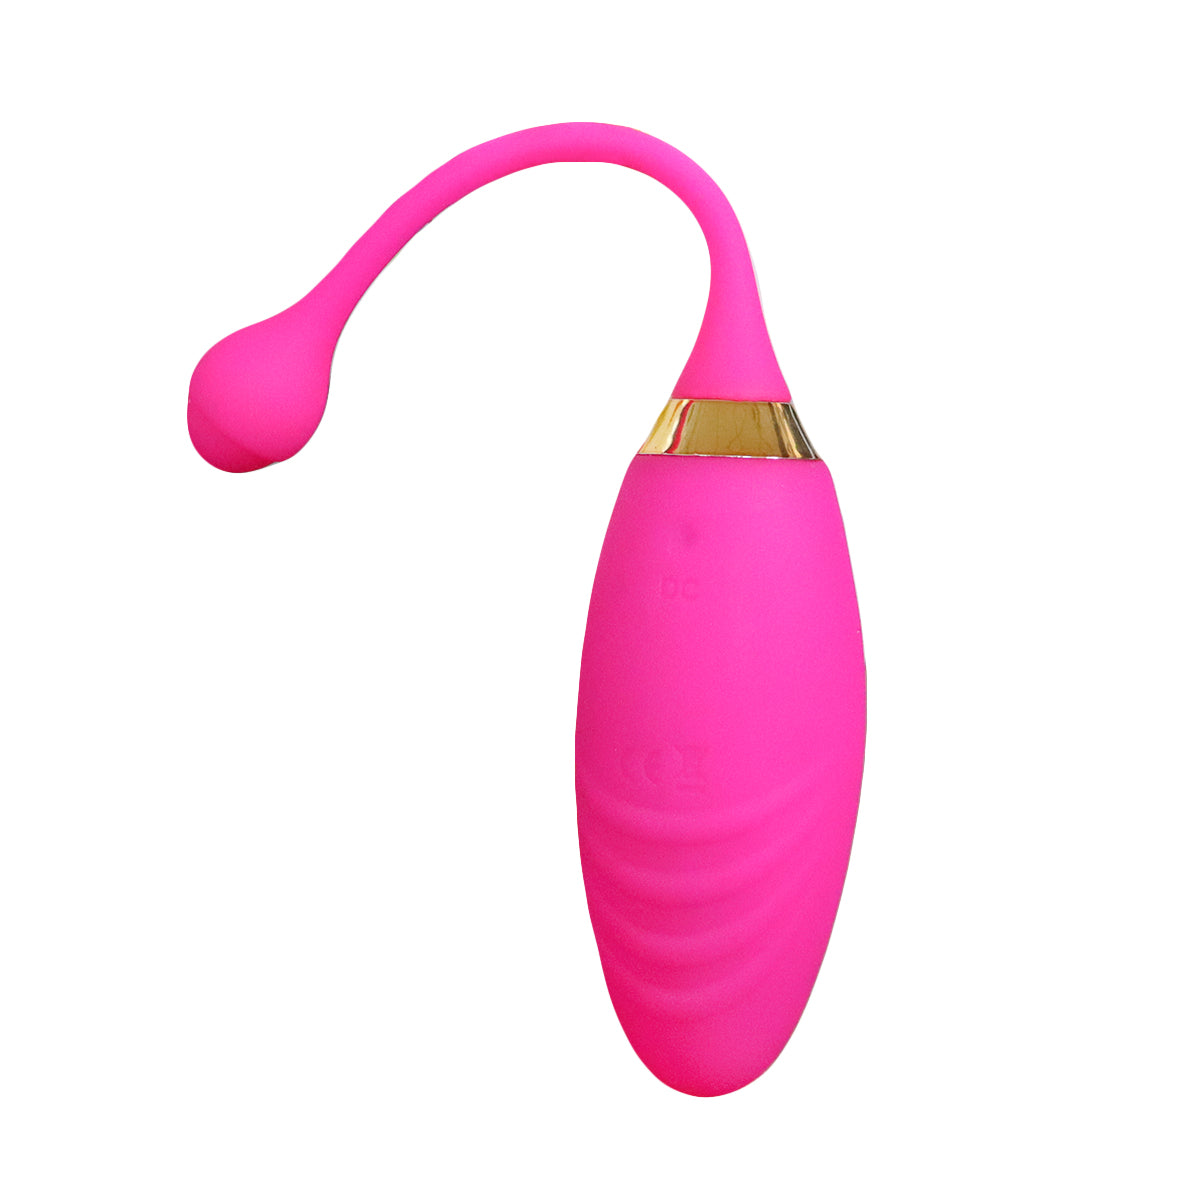 Wireless Fish Vibrator With Remote Control in Pakistan – Vibrator Bullets toys Egg Waterproof for Women